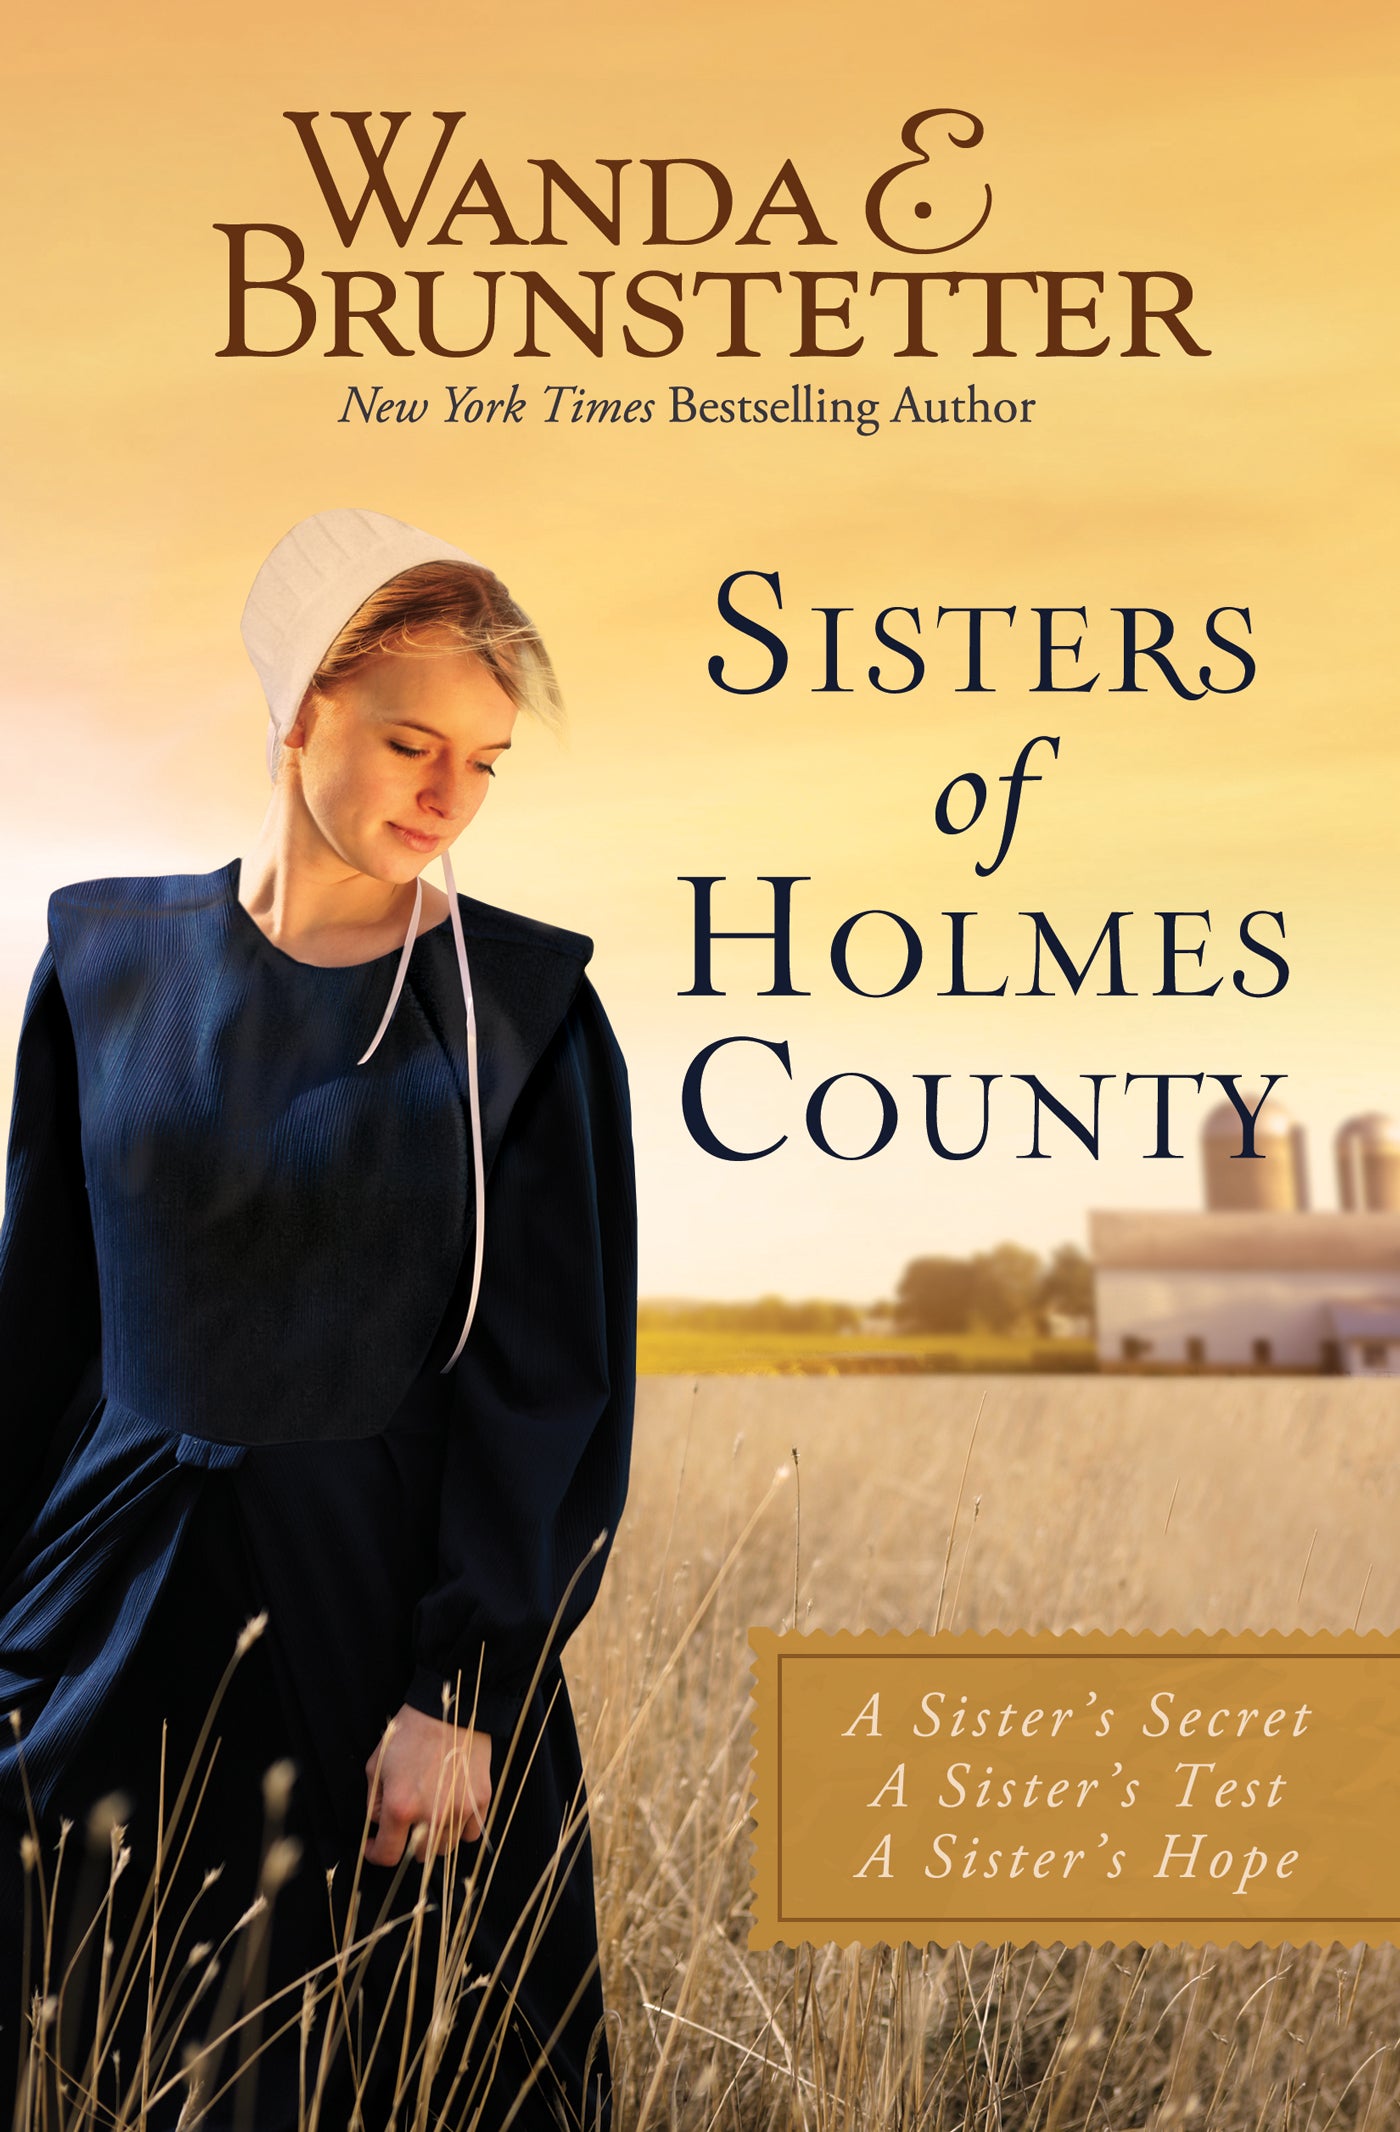 Sisters of Holmes County - The Christian Gift Company